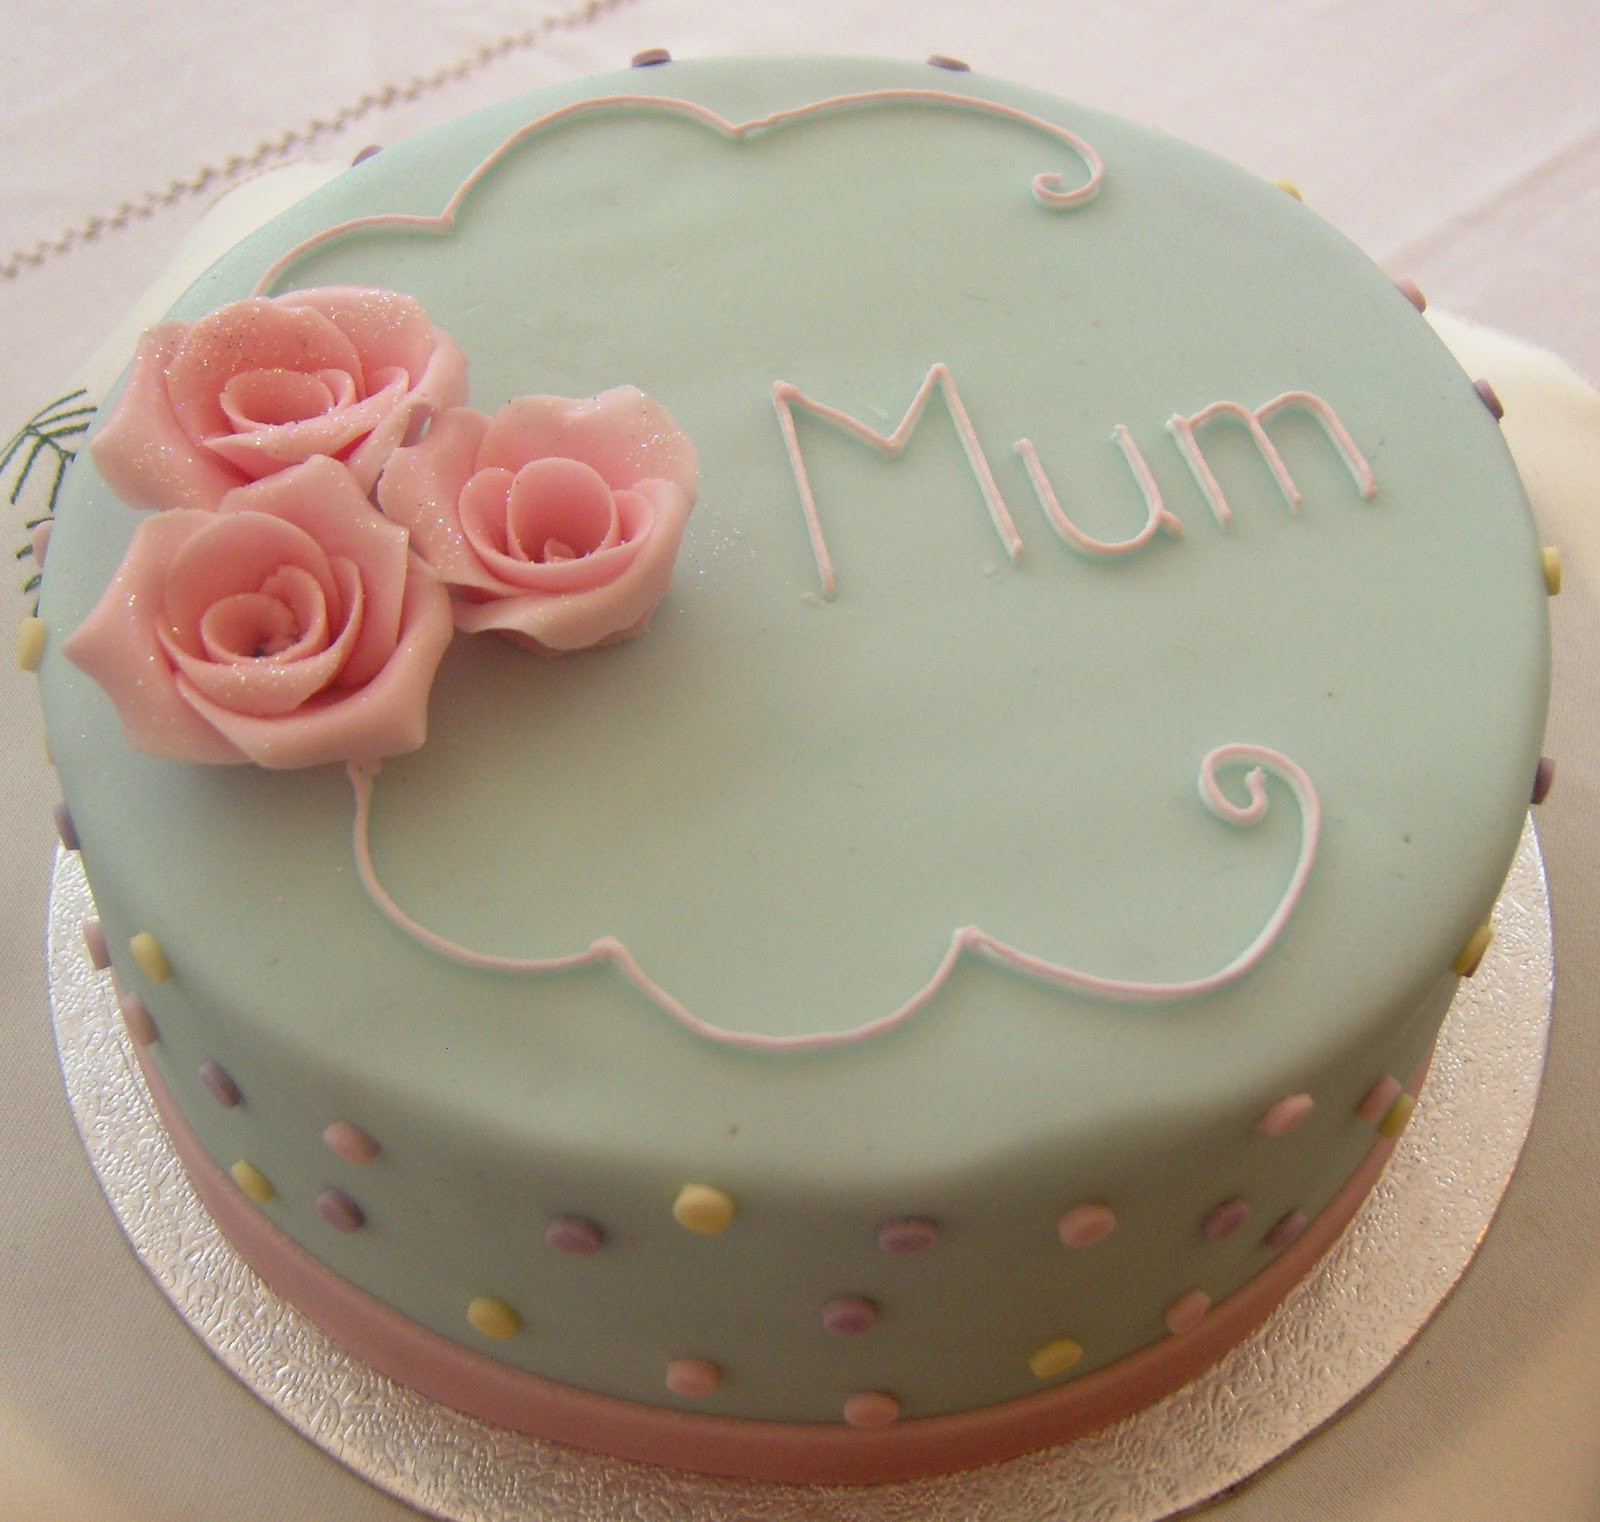 Mom Birthday Cake
 Order Cake For Mom line Buy and Send Cake For Mom from